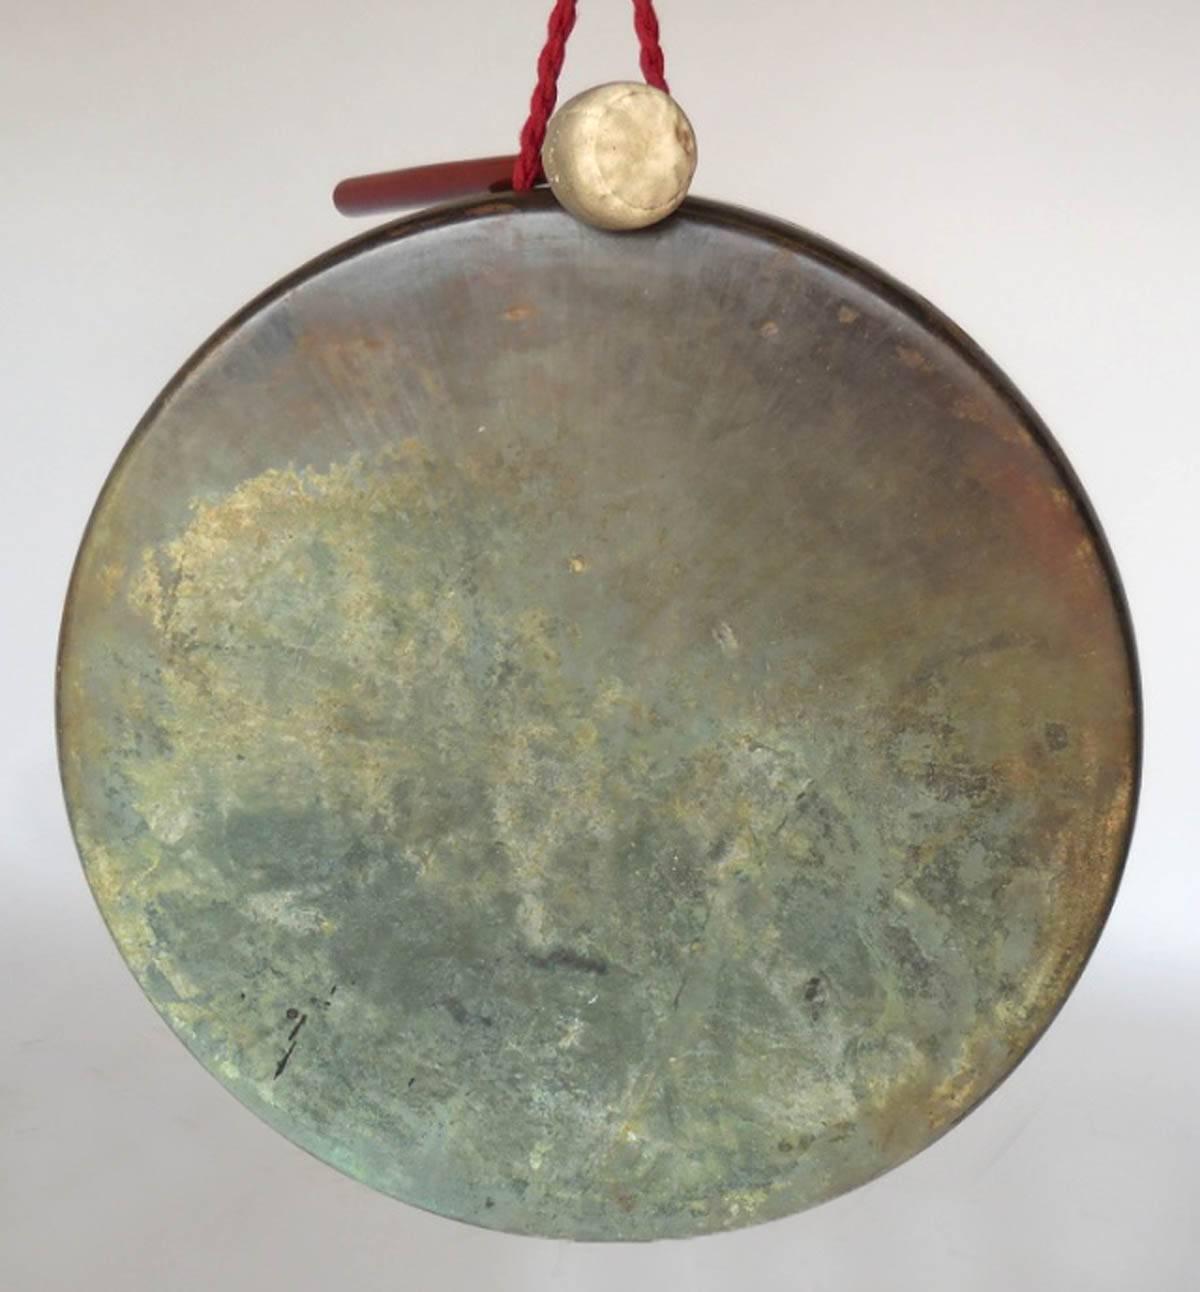 Unusual Late 19th Century to Early 20th Century flat Japanese bronze gong with leather striker. Lovely patina throughout! Nice resonance. The flat surface give it a modern appearance though it is antique.